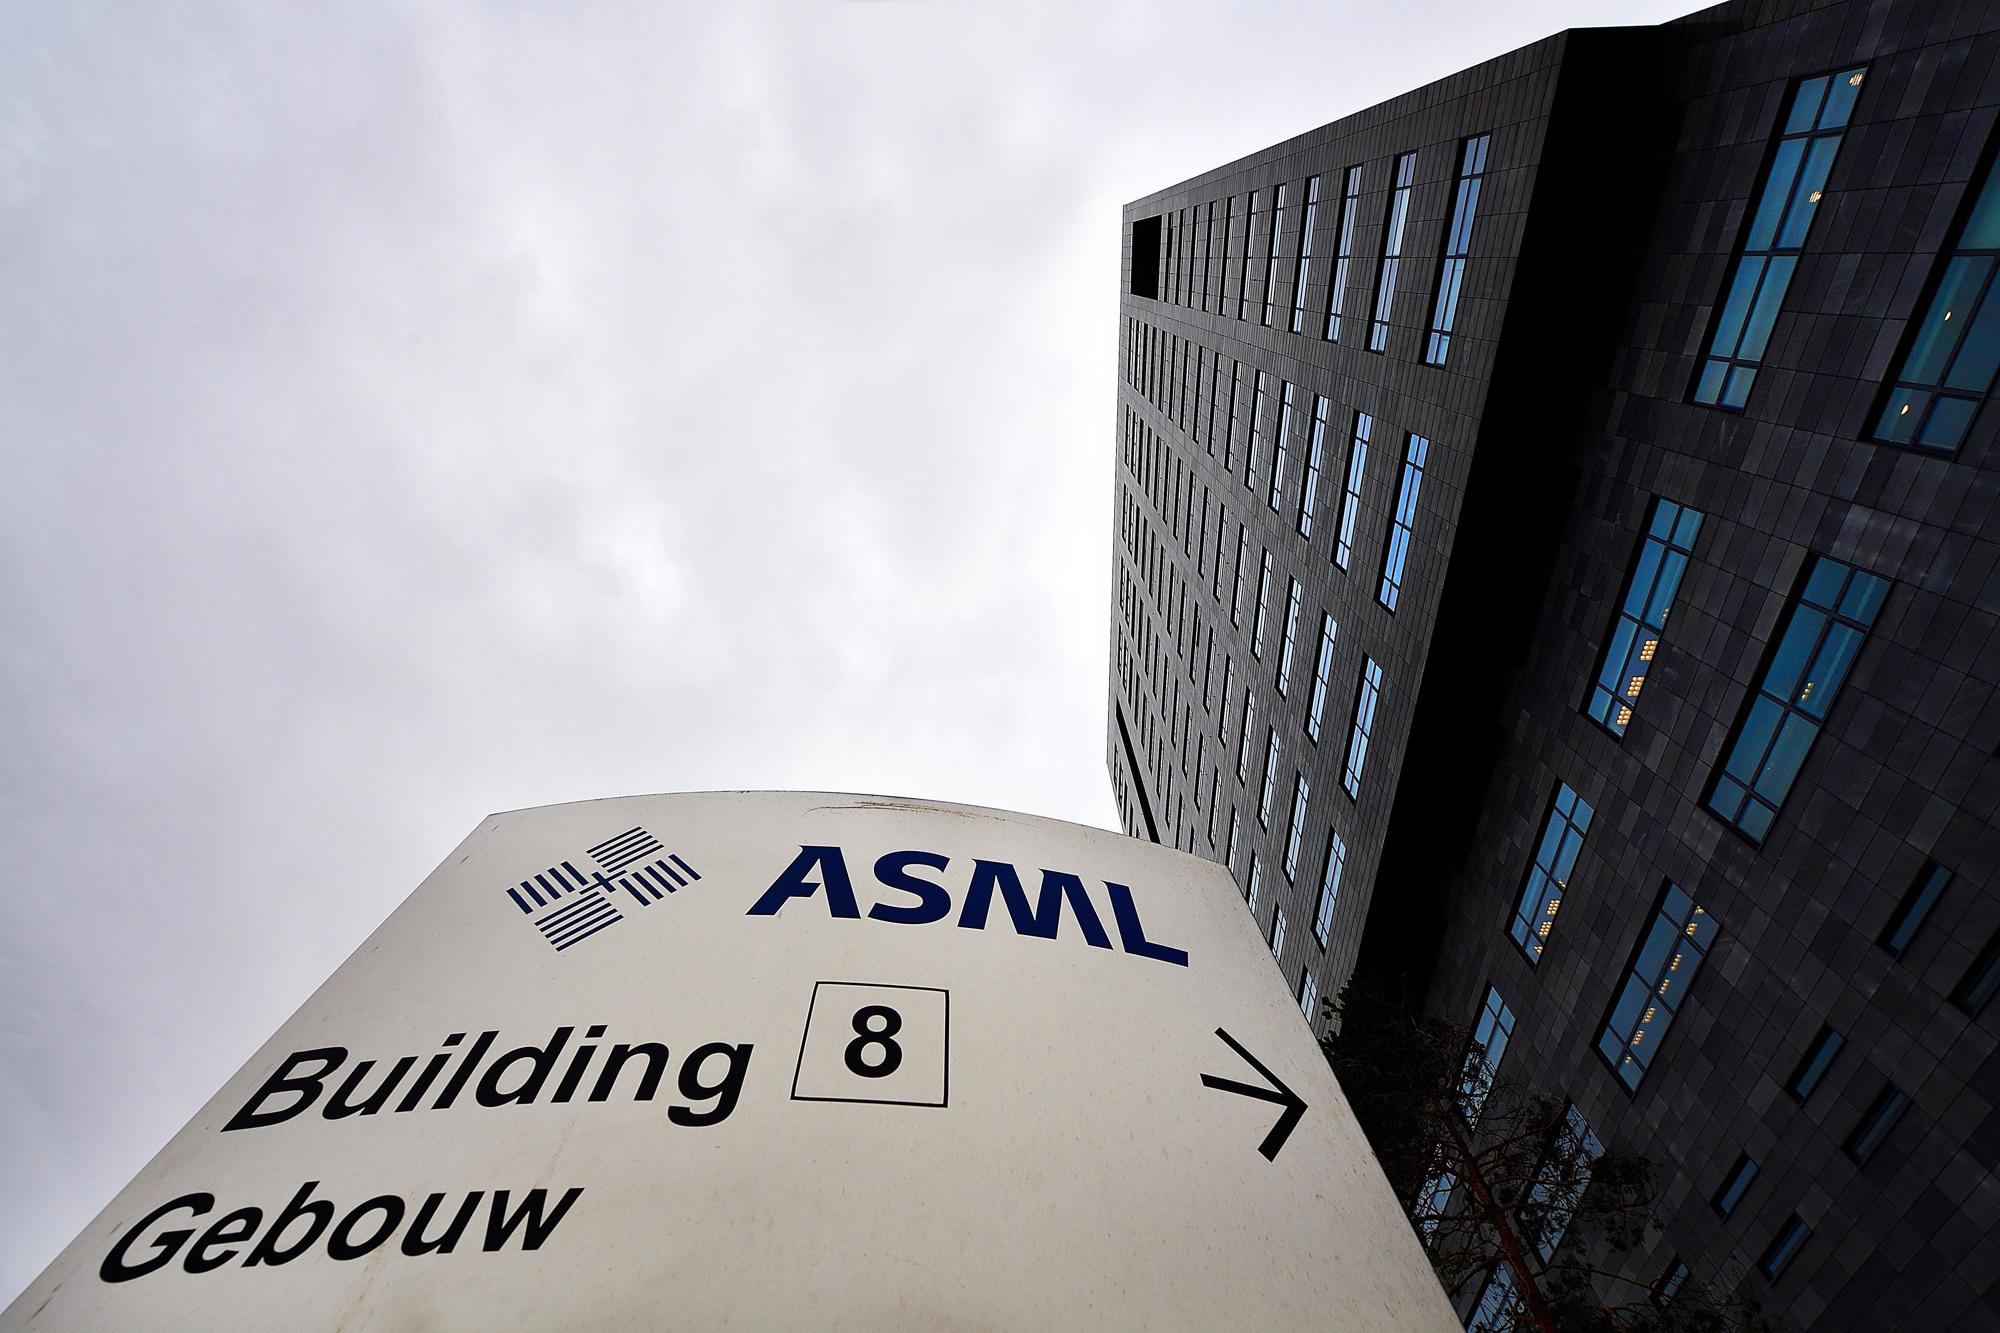  ASML is the world's largest manufacturer of chip machines